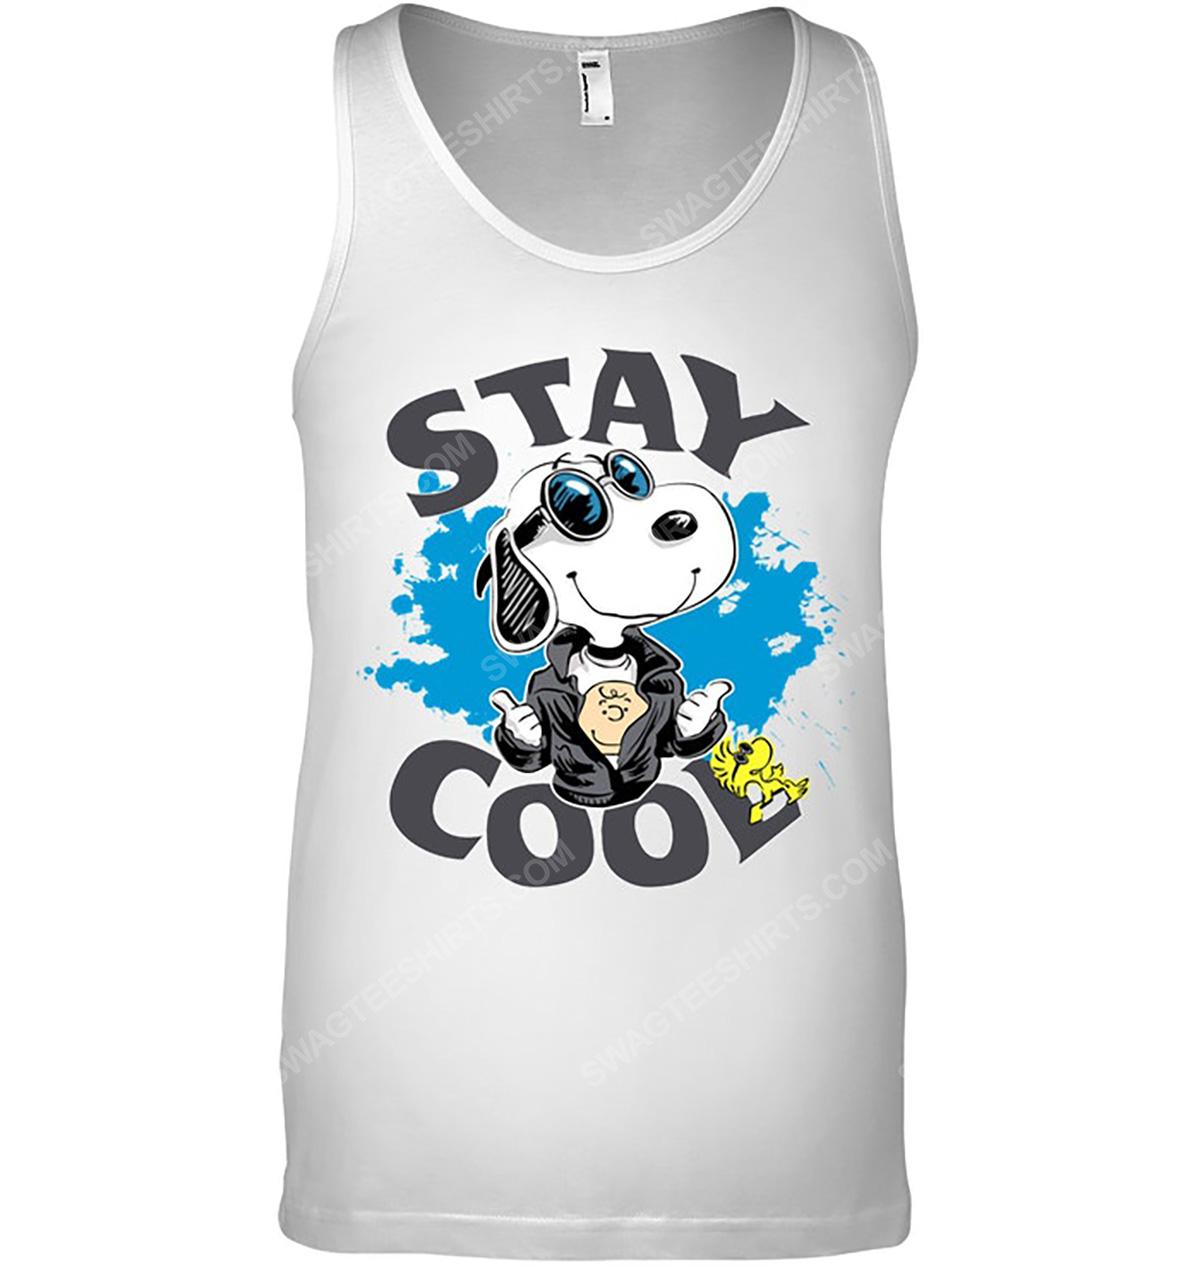 Charlie brown snoopy and woodstock stay cool tank top(1)